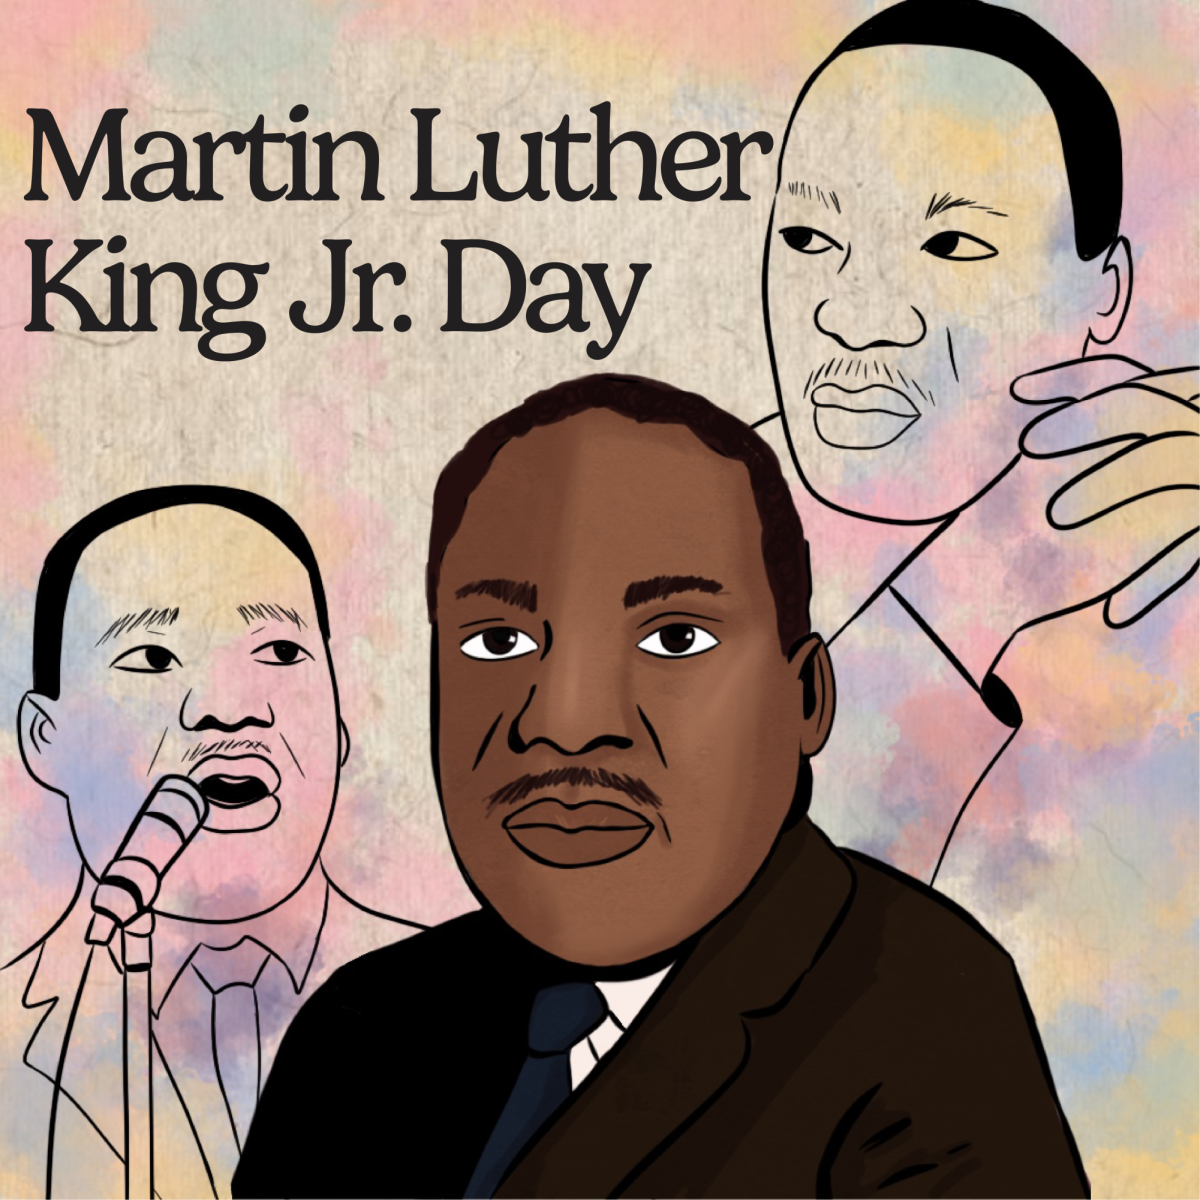 Happy Martin Luther King Jr. Day